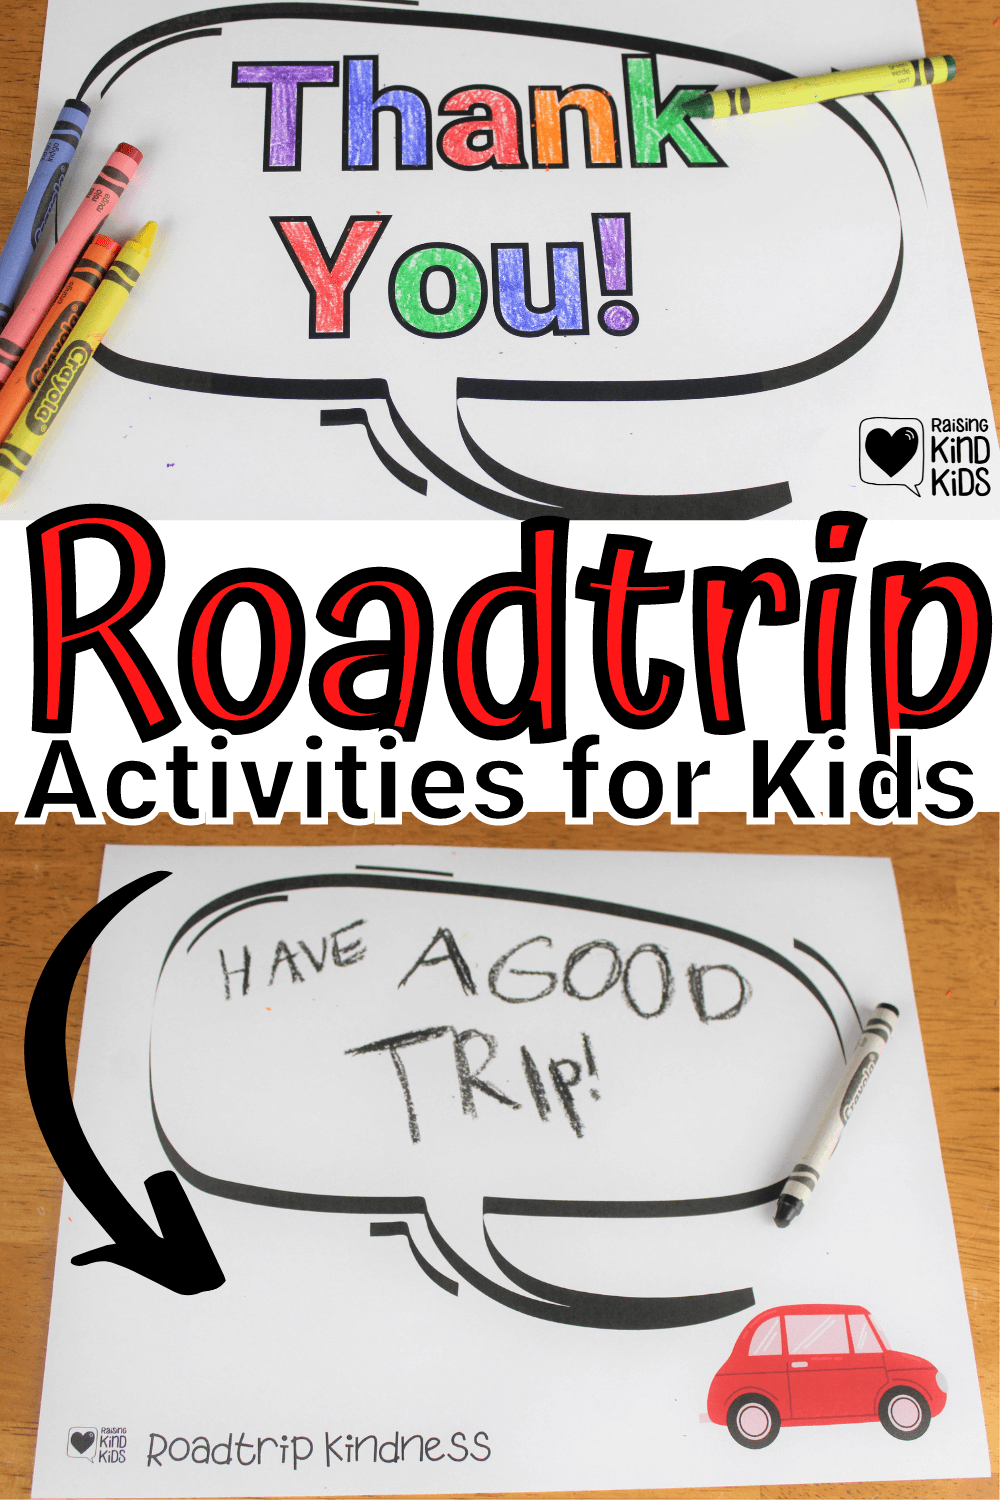 Use these roadtrip activities for kids to spread a little kindness on your family's next road trip.